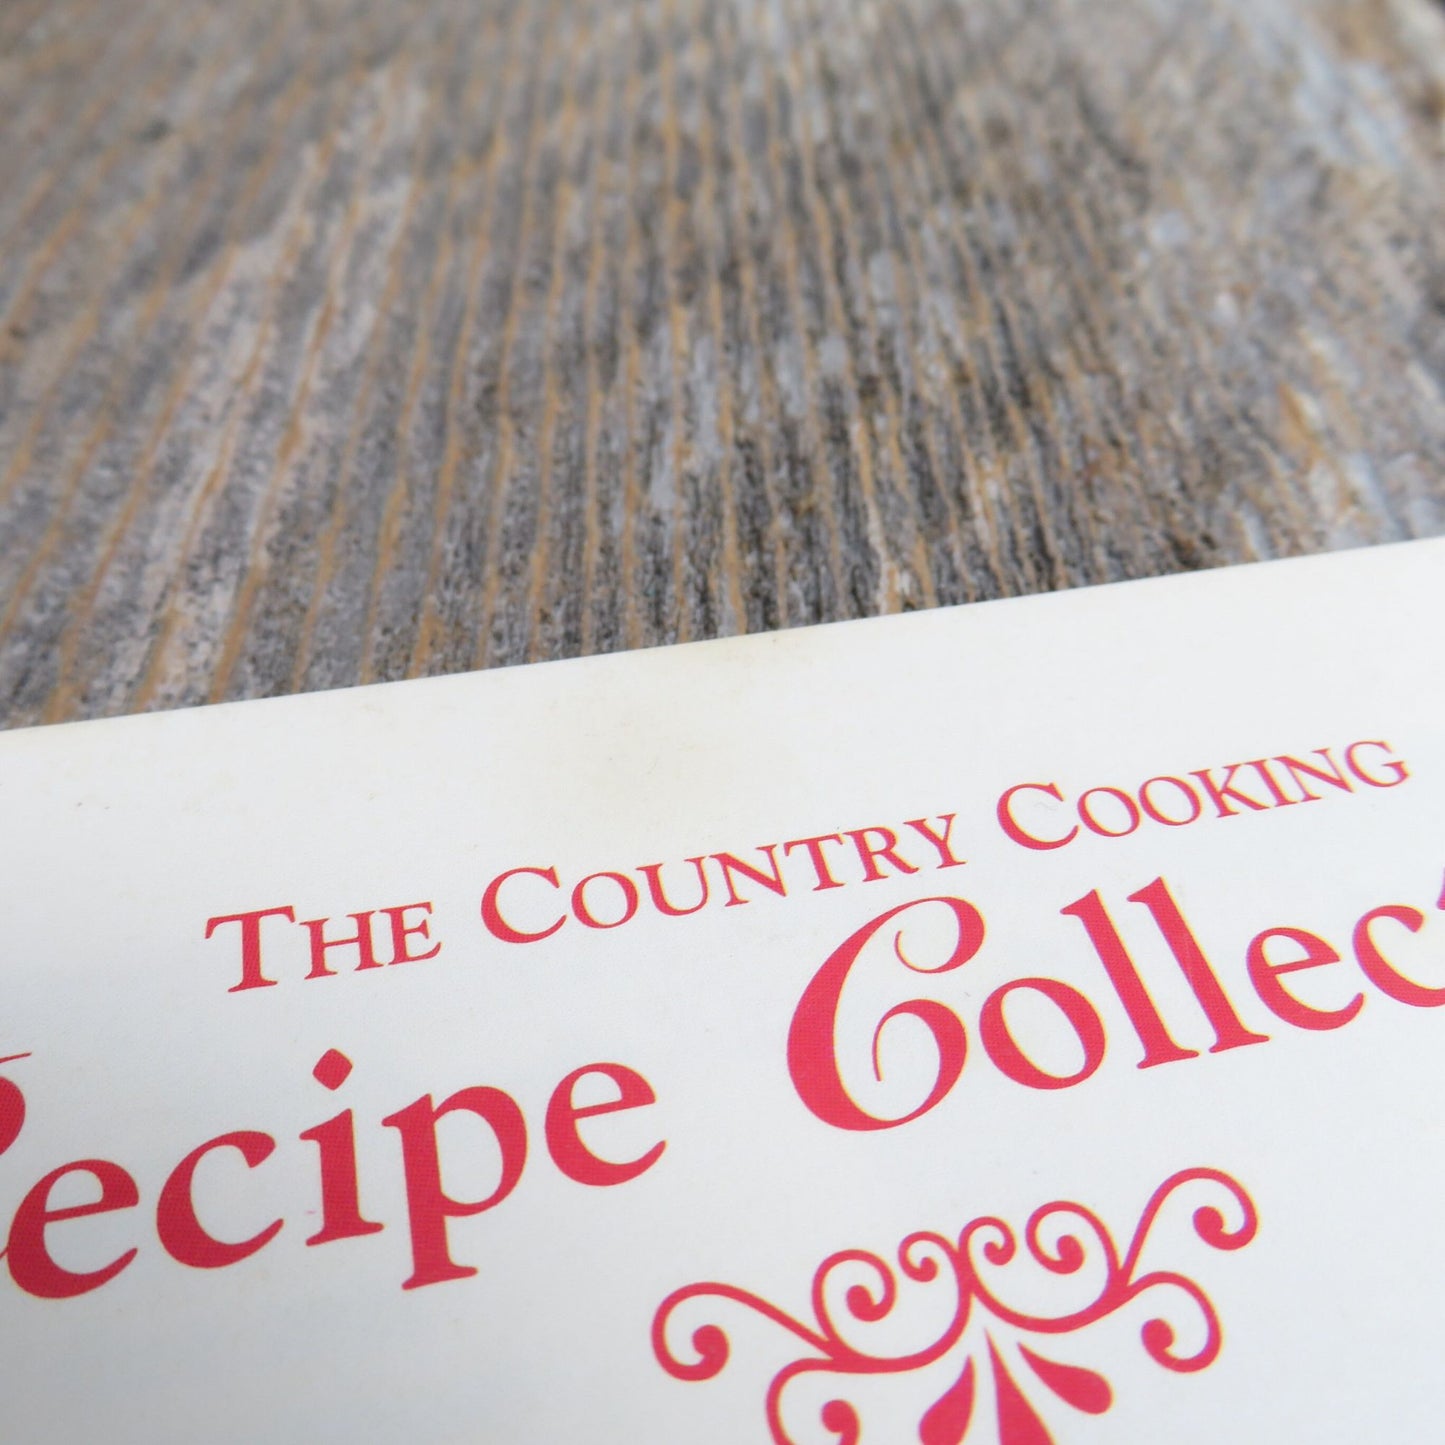 Holiday Recipes Cookbook The Country Cooking Recipe Collection Christmas Pamphlet Grocery Store Booklet 2002